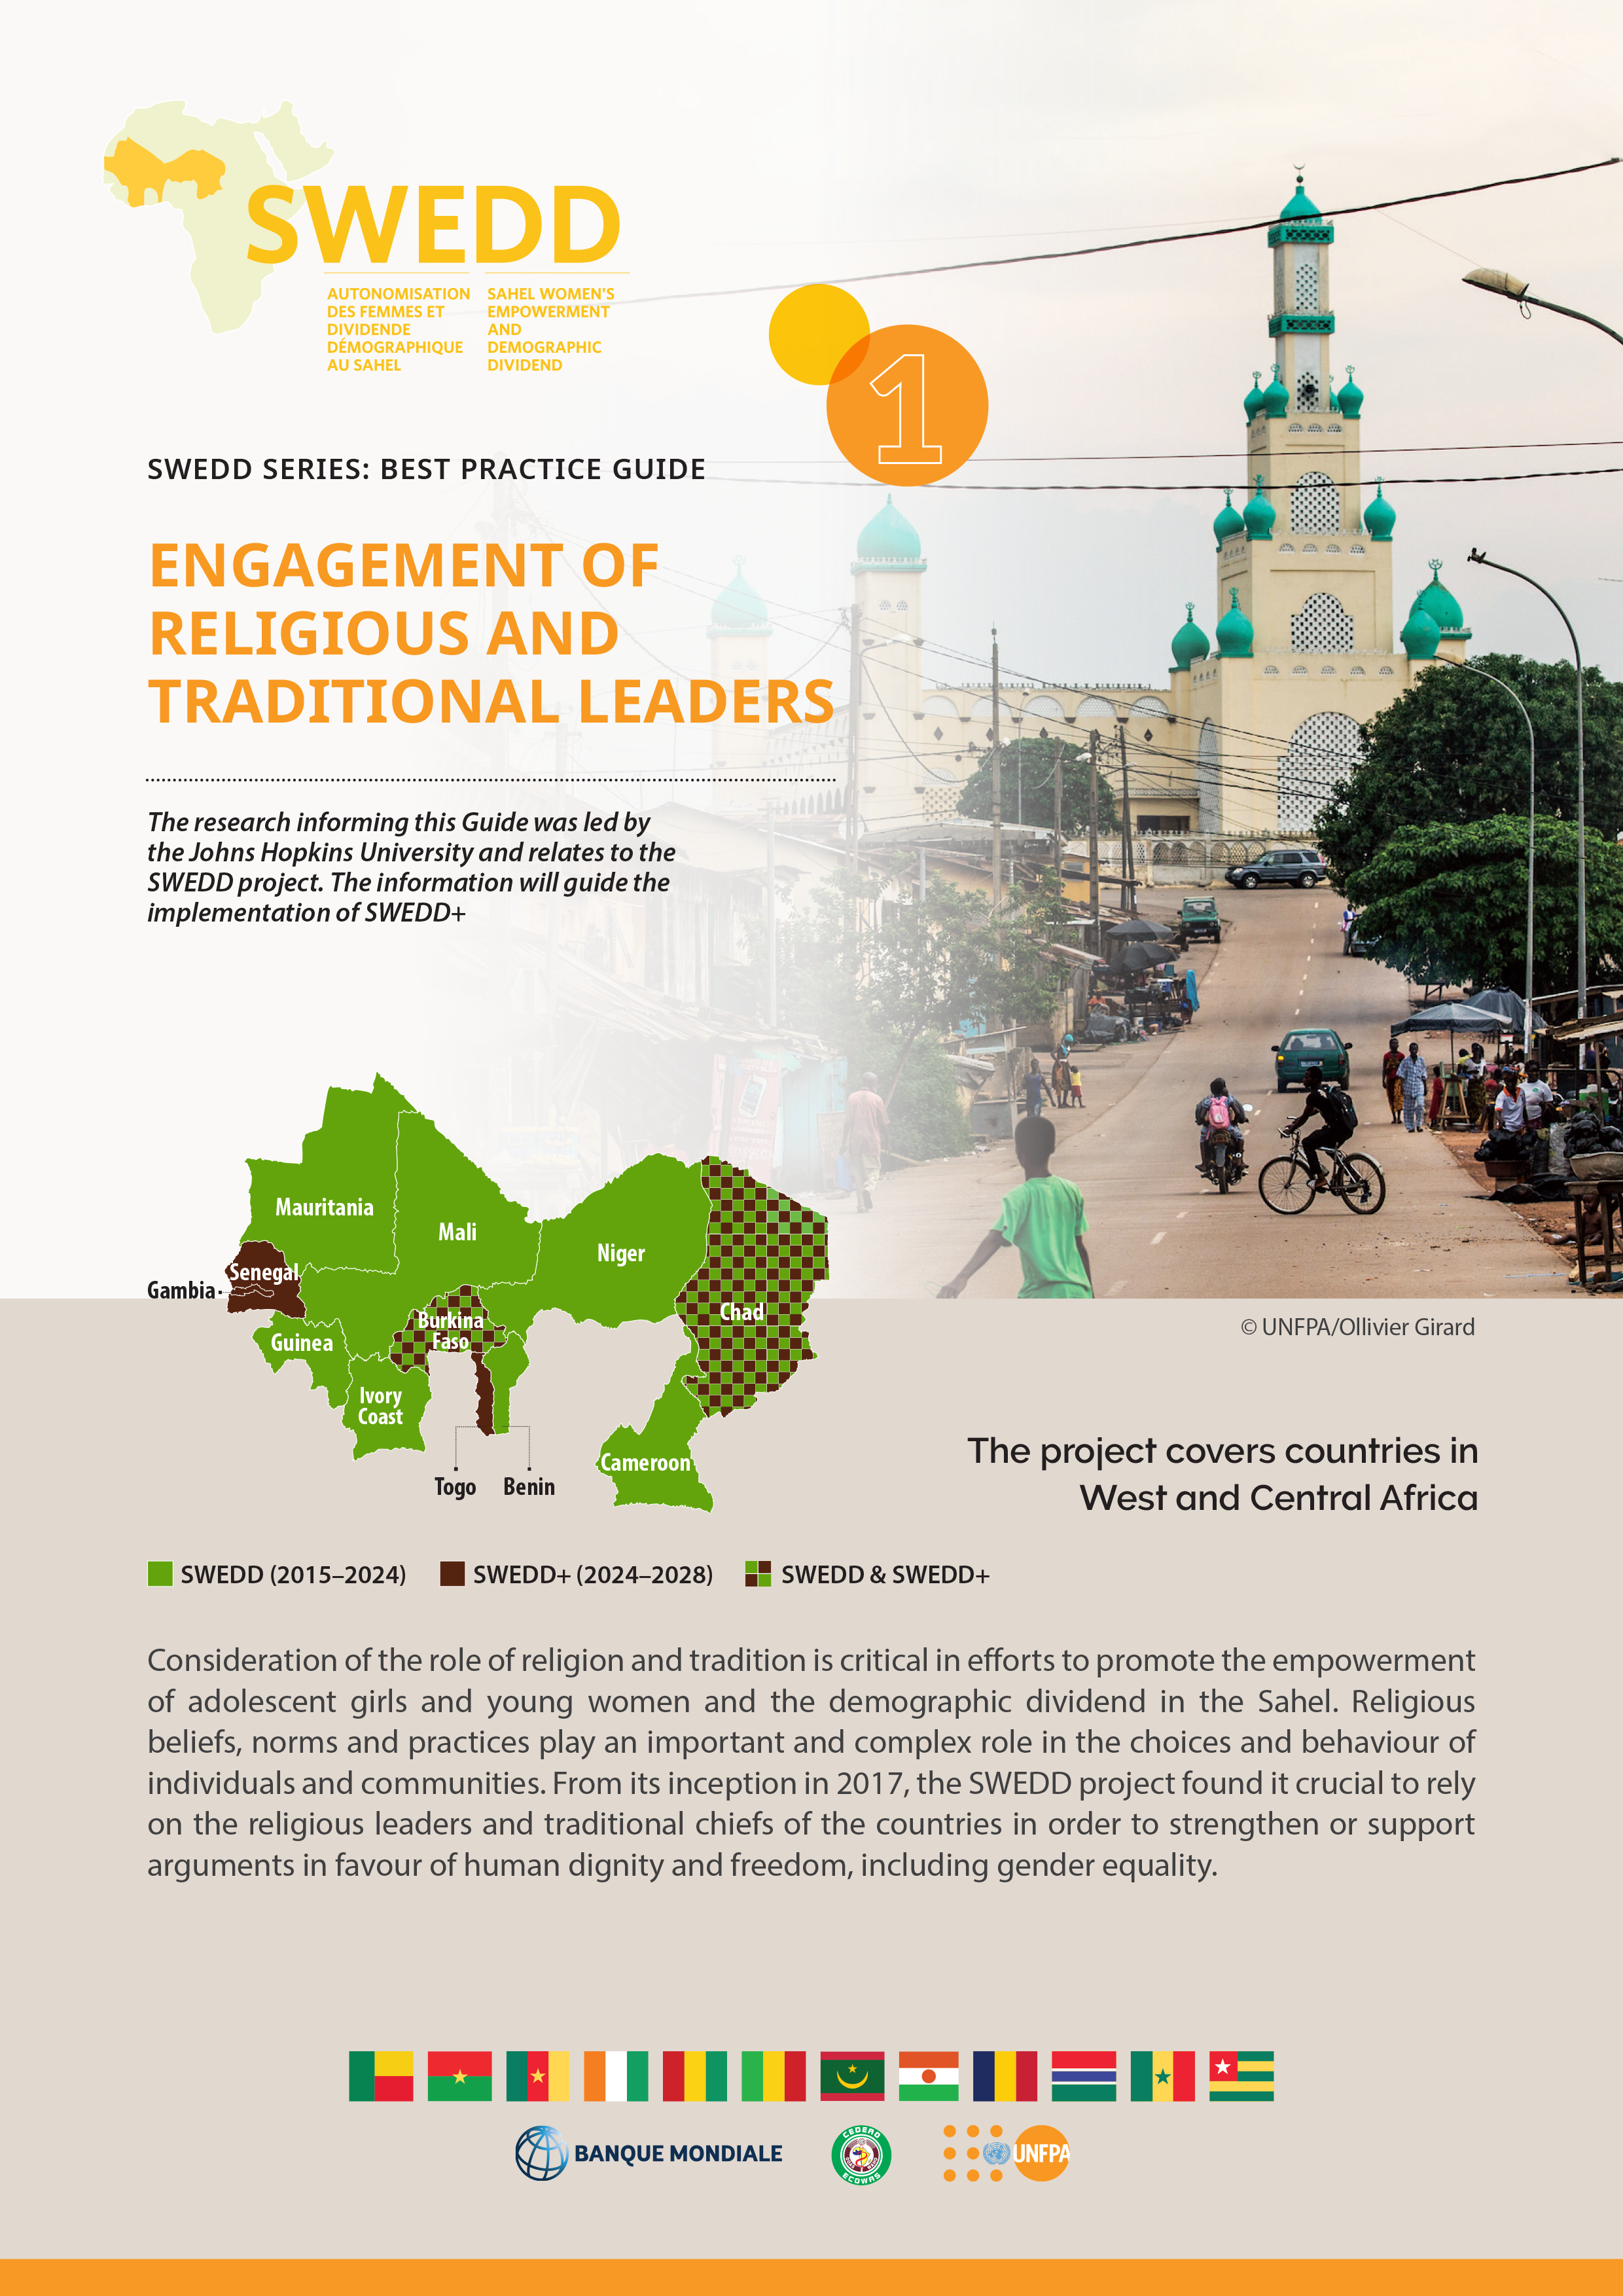 1. Engagement of religious and traditional leaders